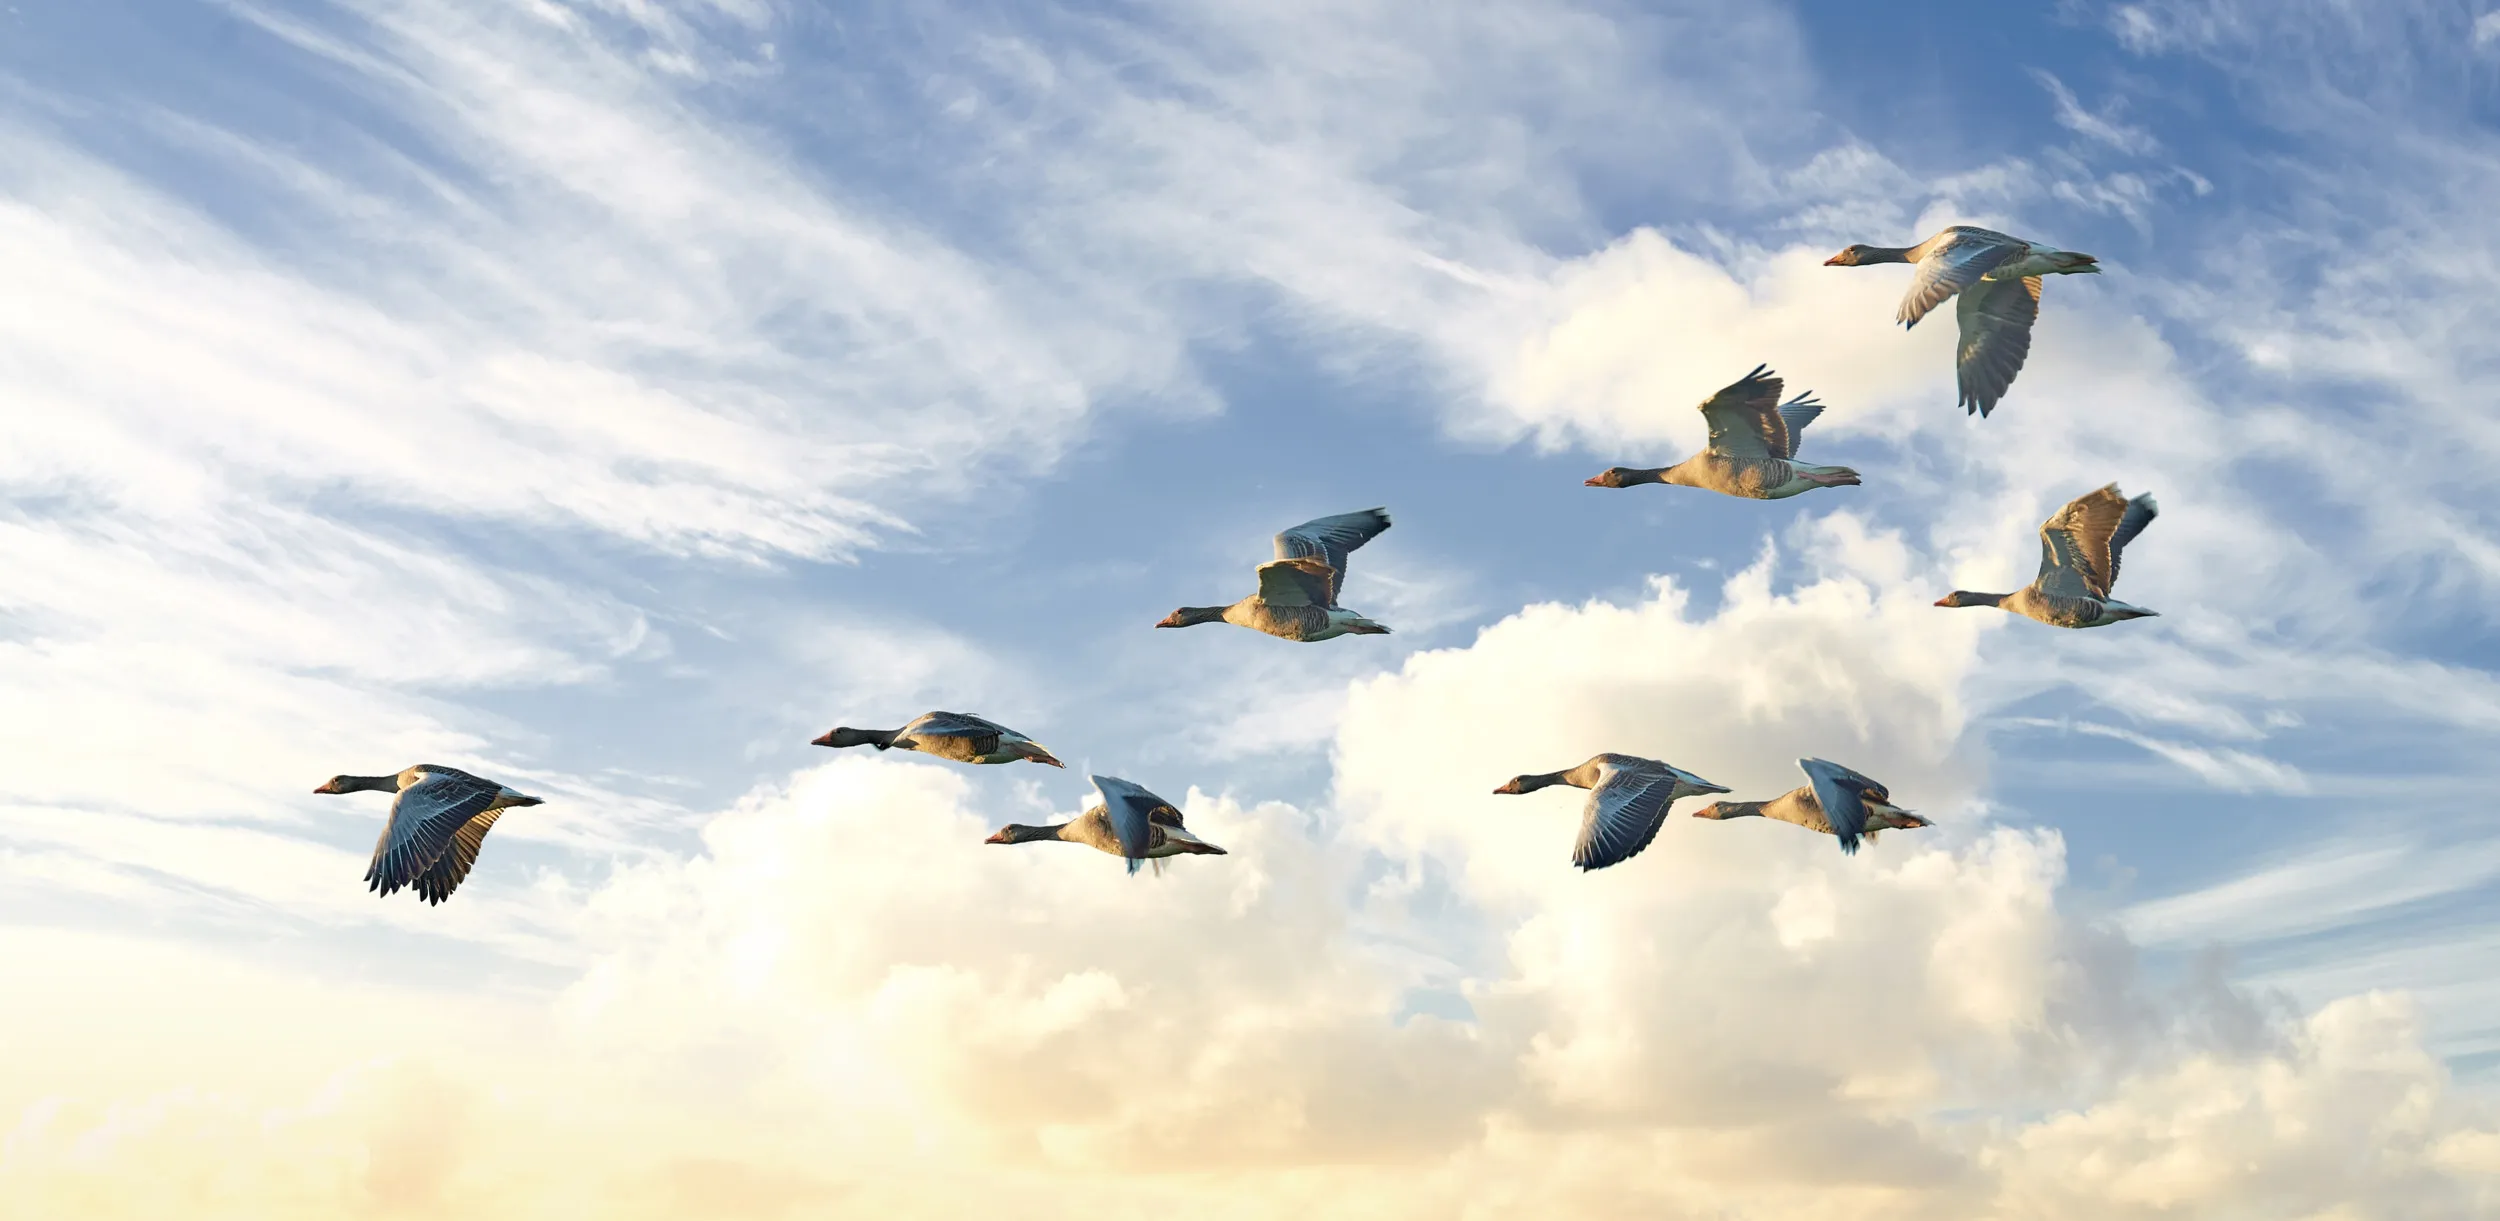 A group of Greylag Geese flying across a blue sky with fluffy clouds.